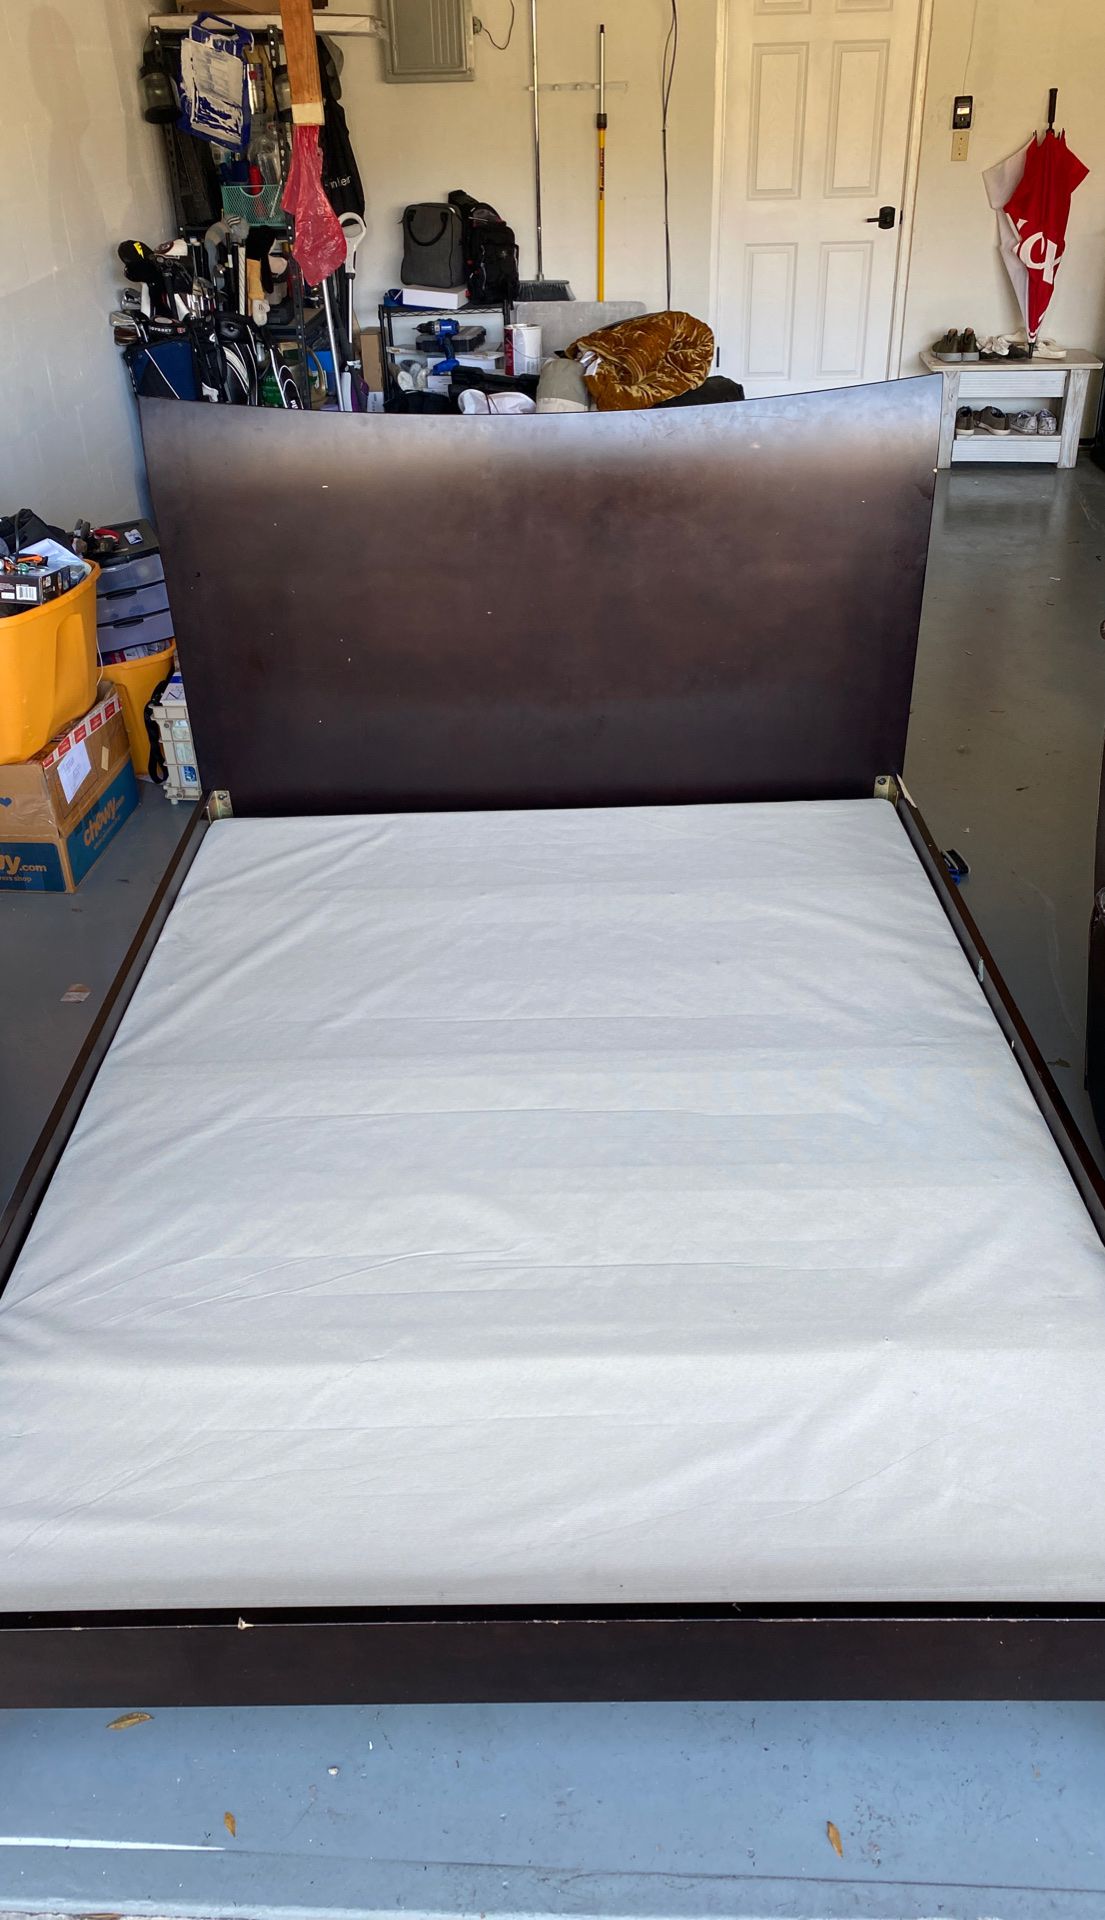 Queen bed frame with bunky board